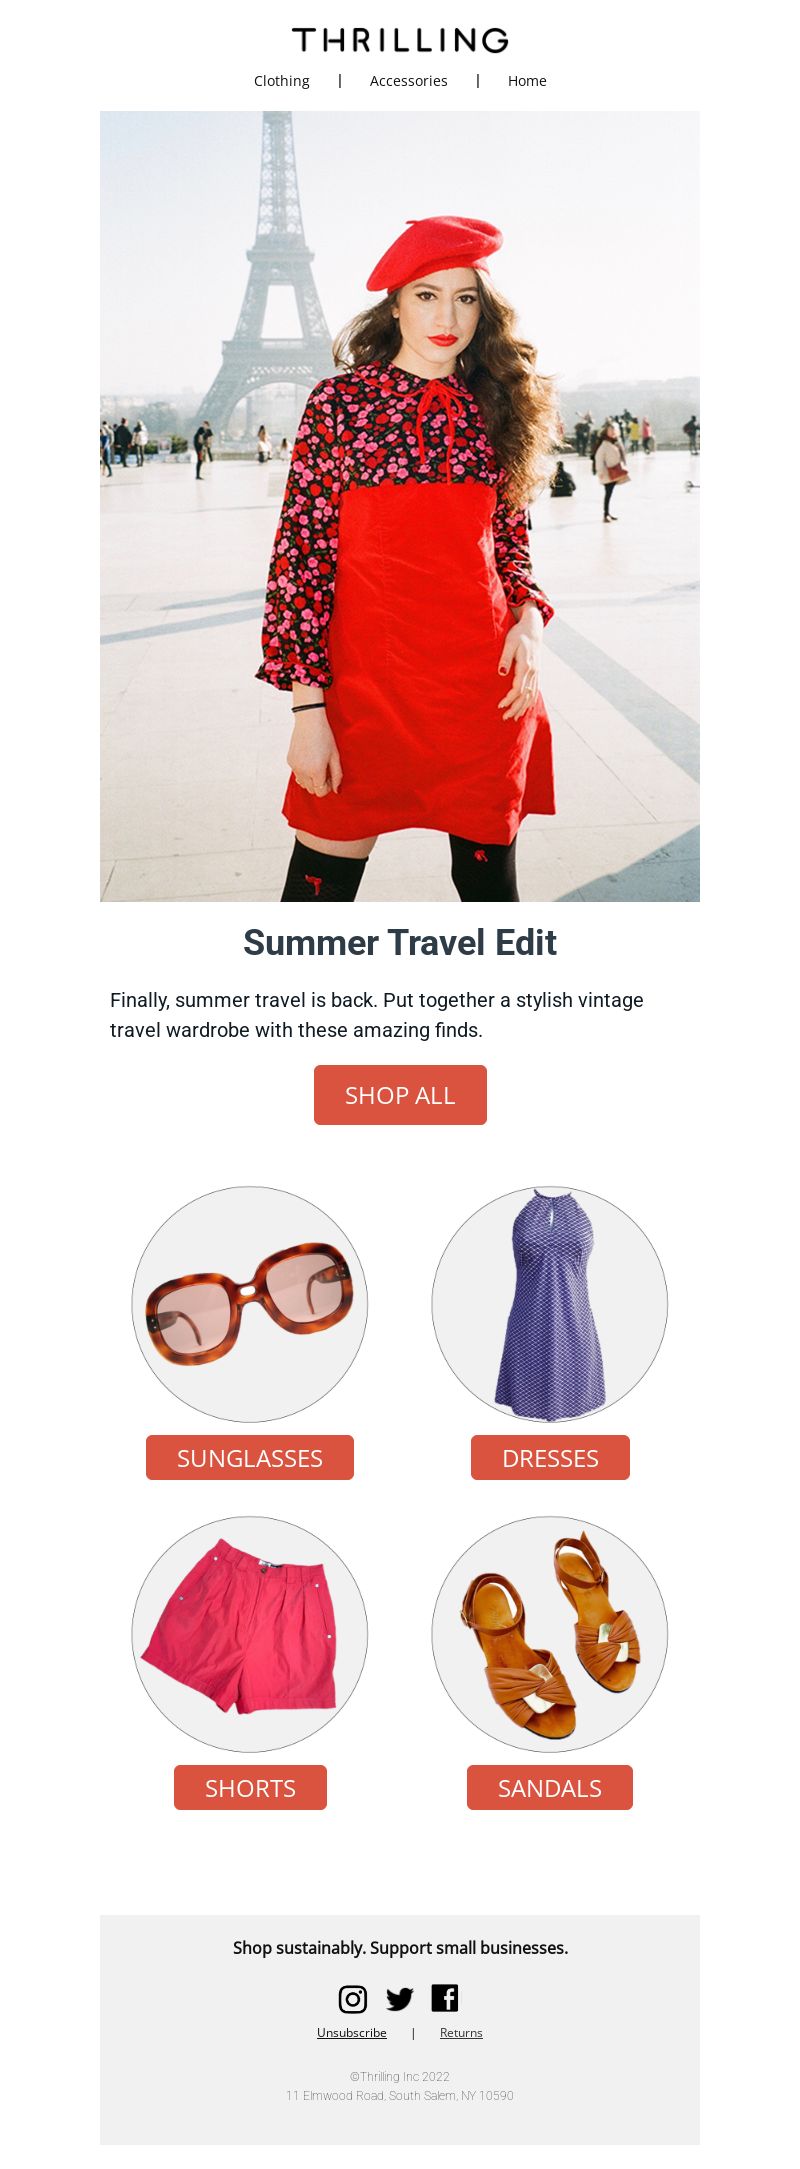 image of an email. The header image is a white woman wearing vintage clothing in front of the Eiffel Tower and a headline that says Summer Travel Edit. There are also 4 circle images calling out specific categories.